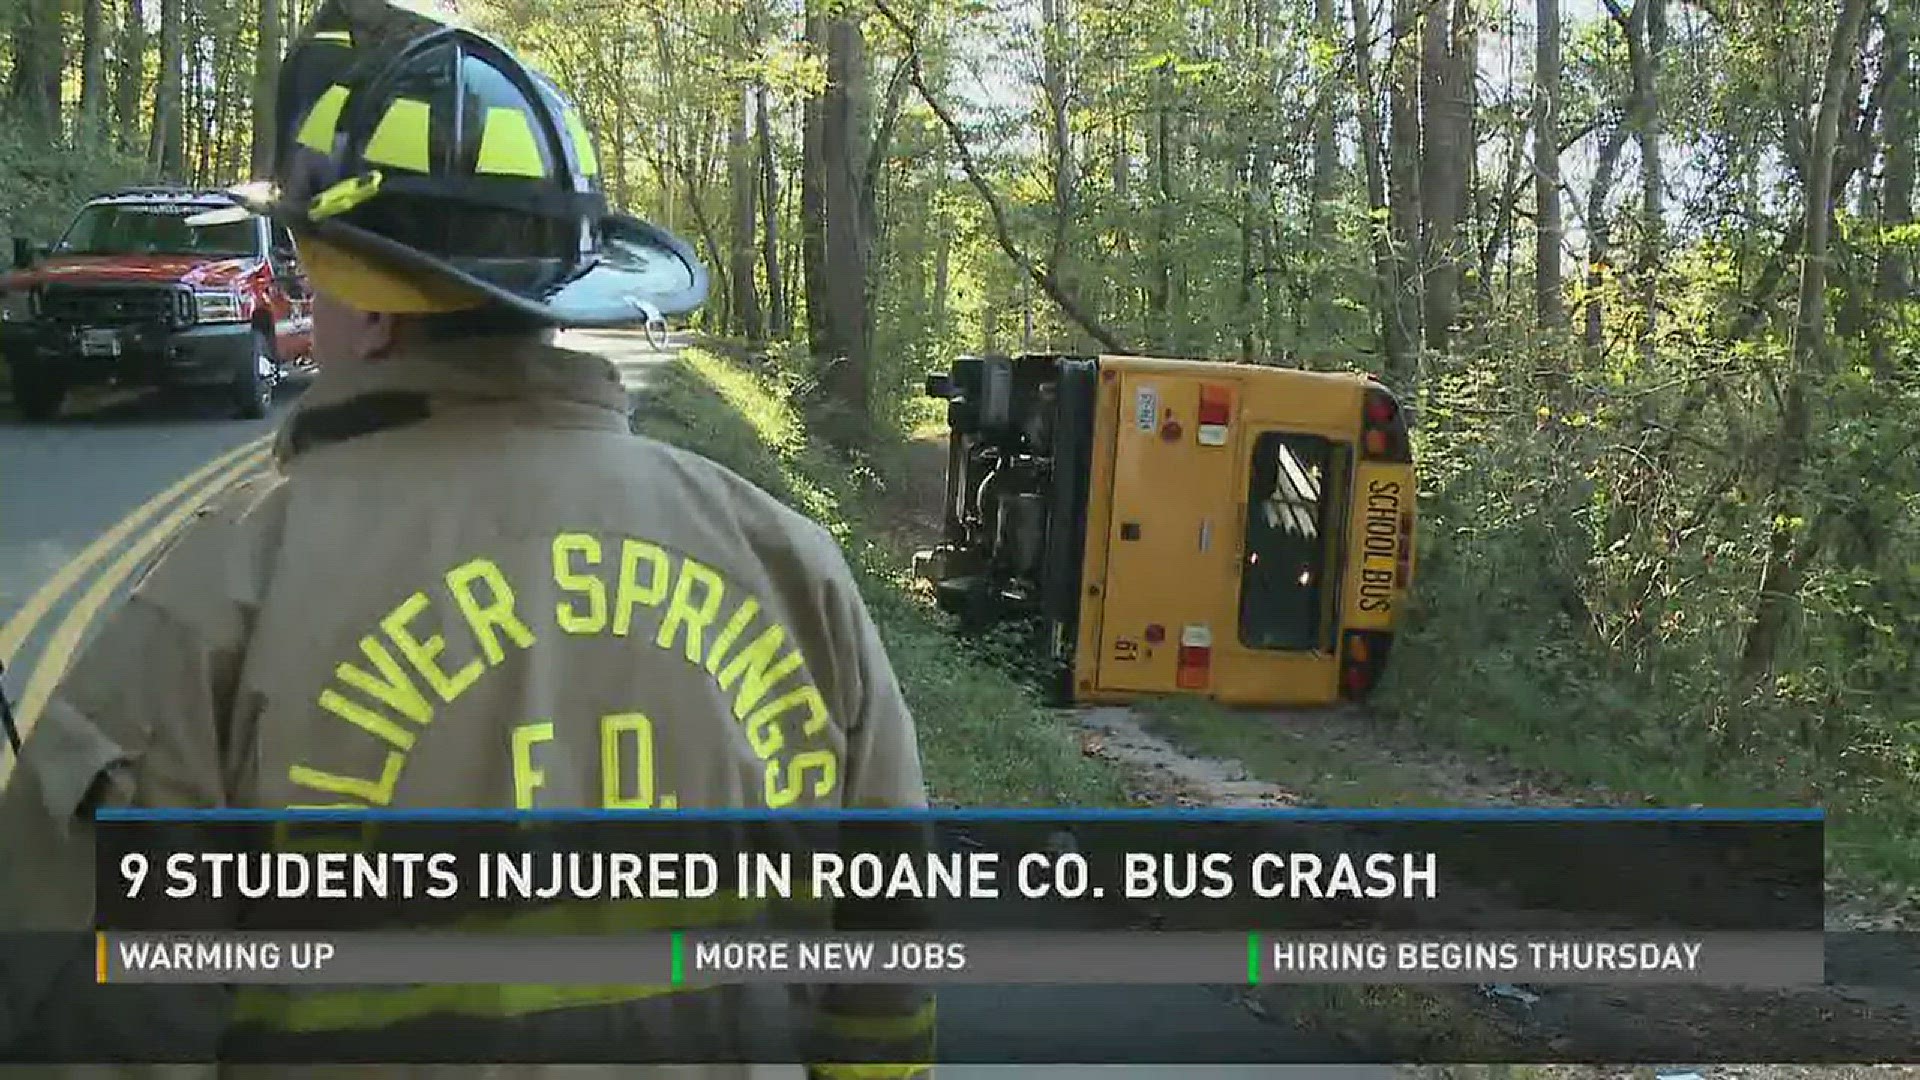 Twenty-two students were riding on a Roane County bus that went off a winding road Wednesday afternoon. Nine were taken for treatment. Oct. 21, 2015